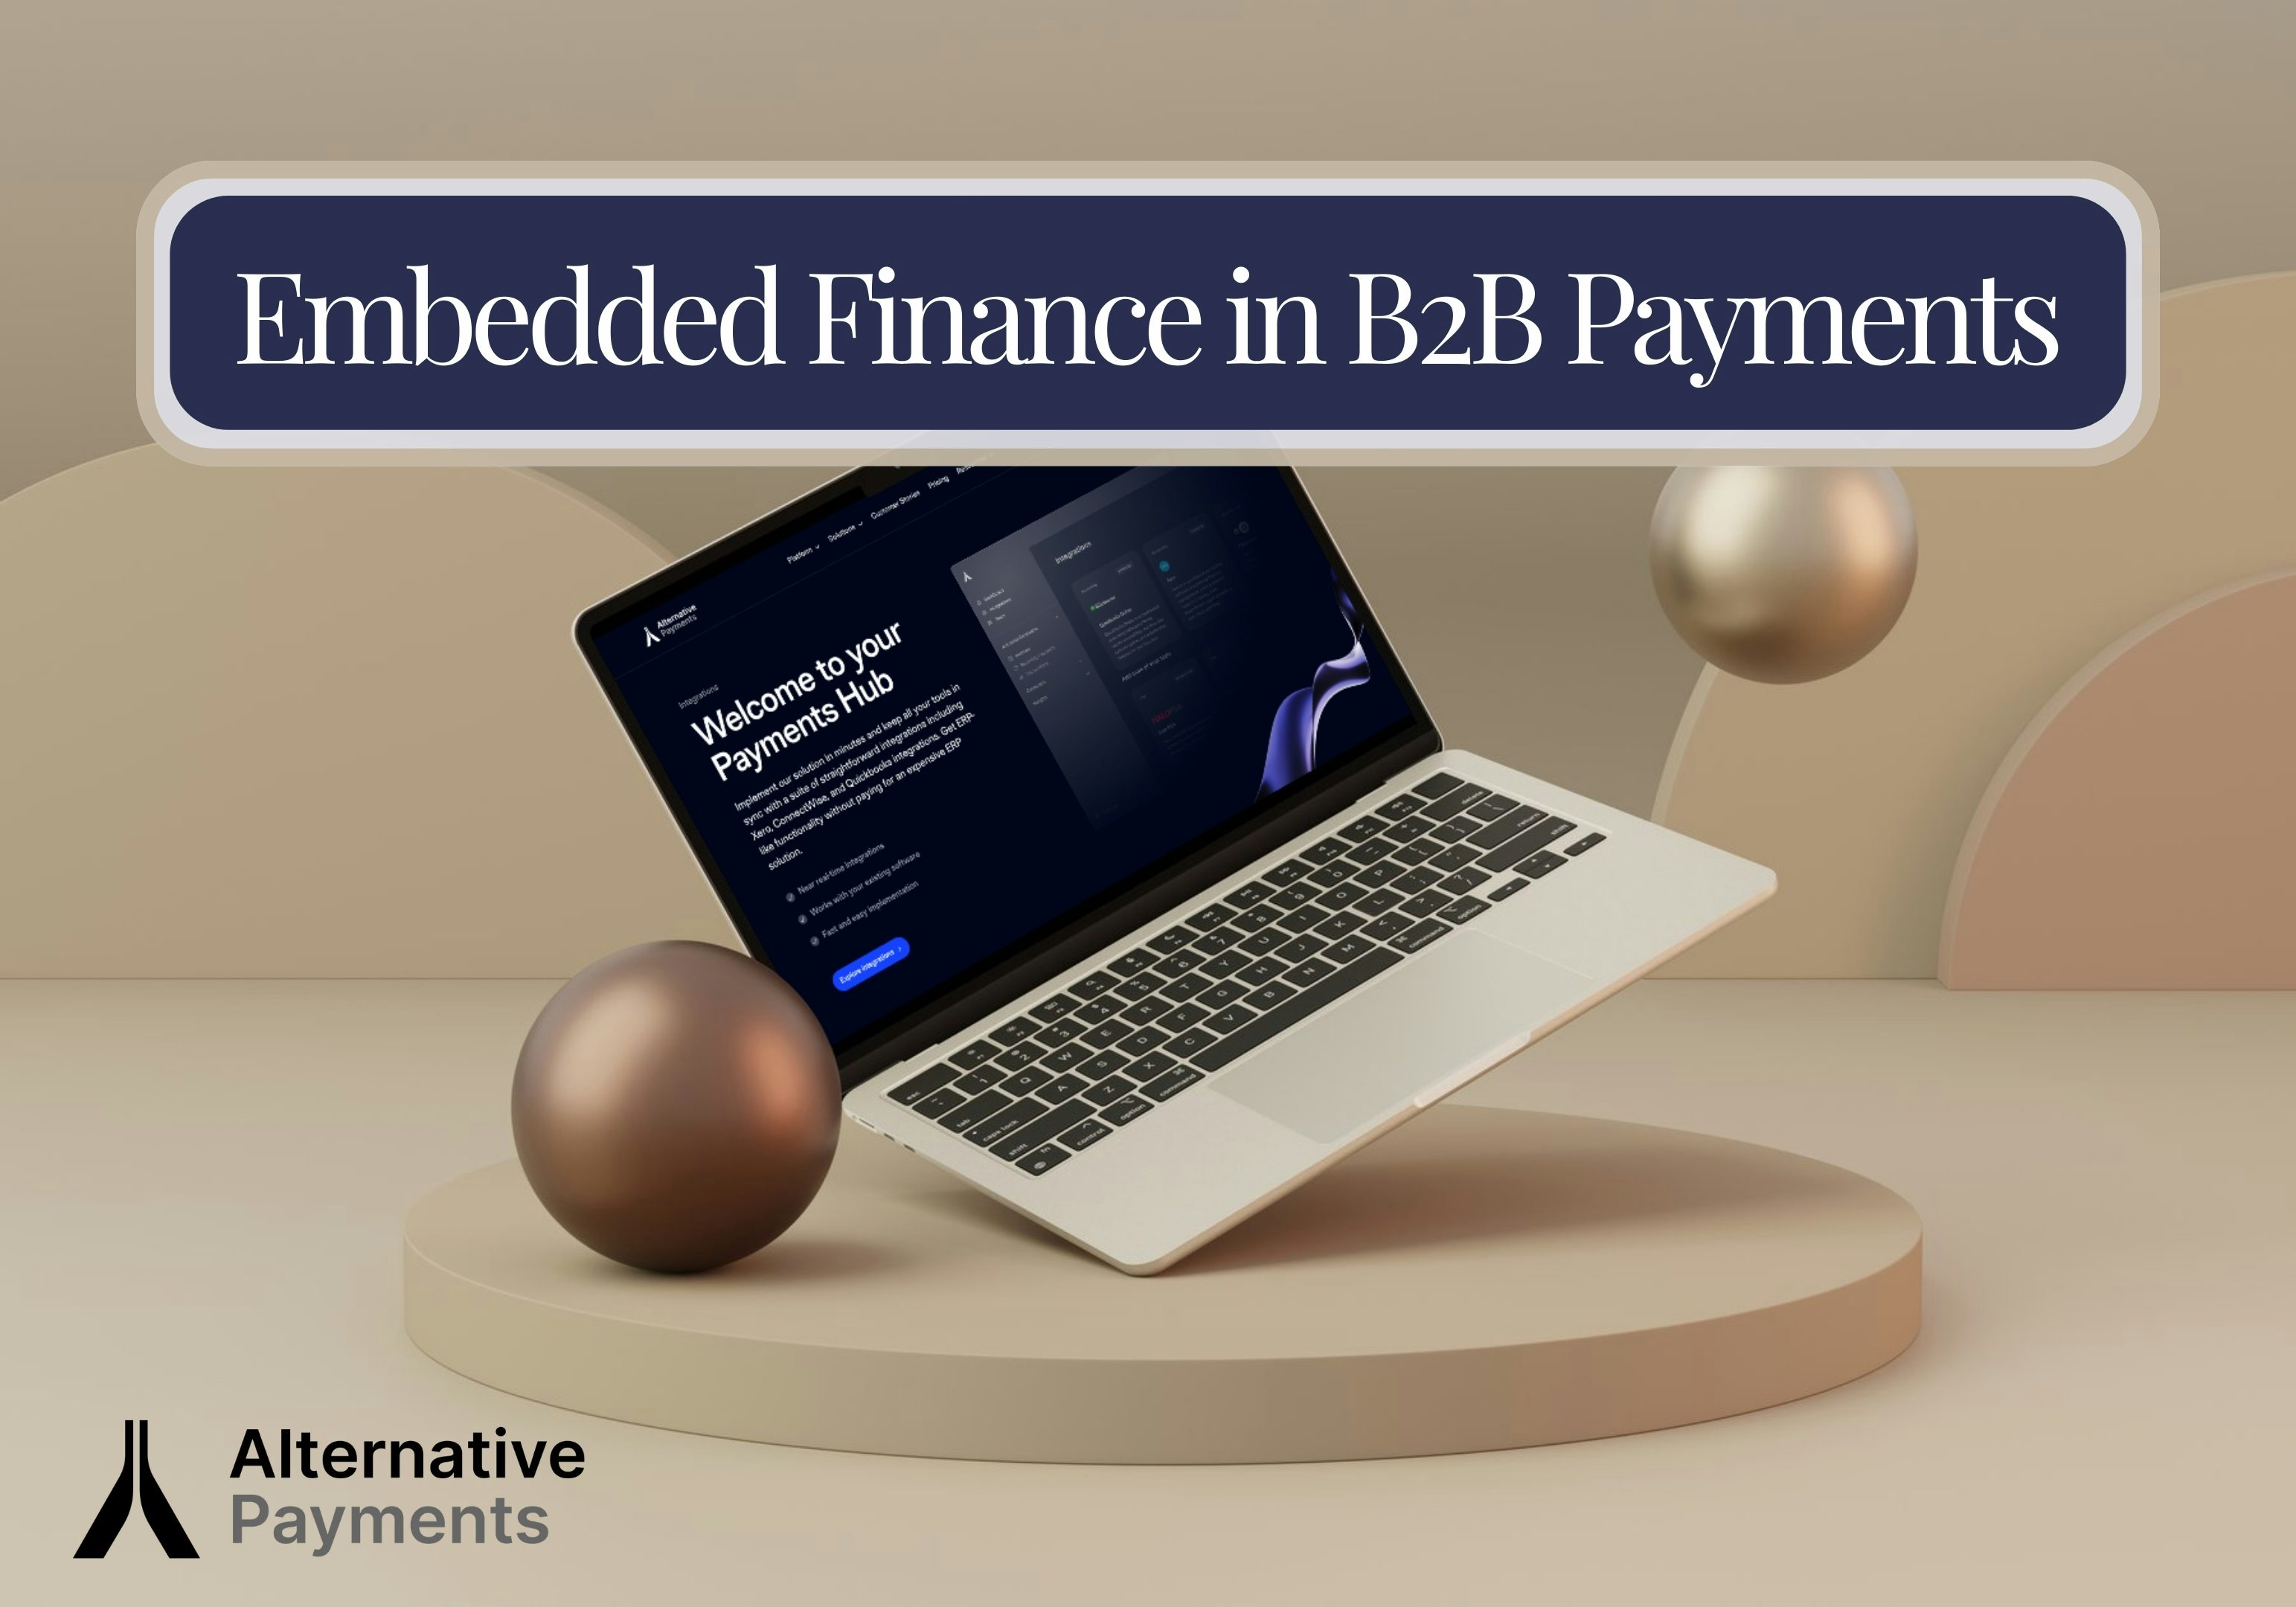 A modern-styled graphic design showcasing an Apple laptop with the Alternative Payments website integration page. The page itself features the way it’s products and services are designed with embedded finance in mind. The website’s header, “Welcome to your Payments Hub” espouses that notion. The different shapes and backgrounds are various shades of gold. At the top is a navy circular rectangle outlined in white with white lettering, “Embedded Finance in B2B Payments”.